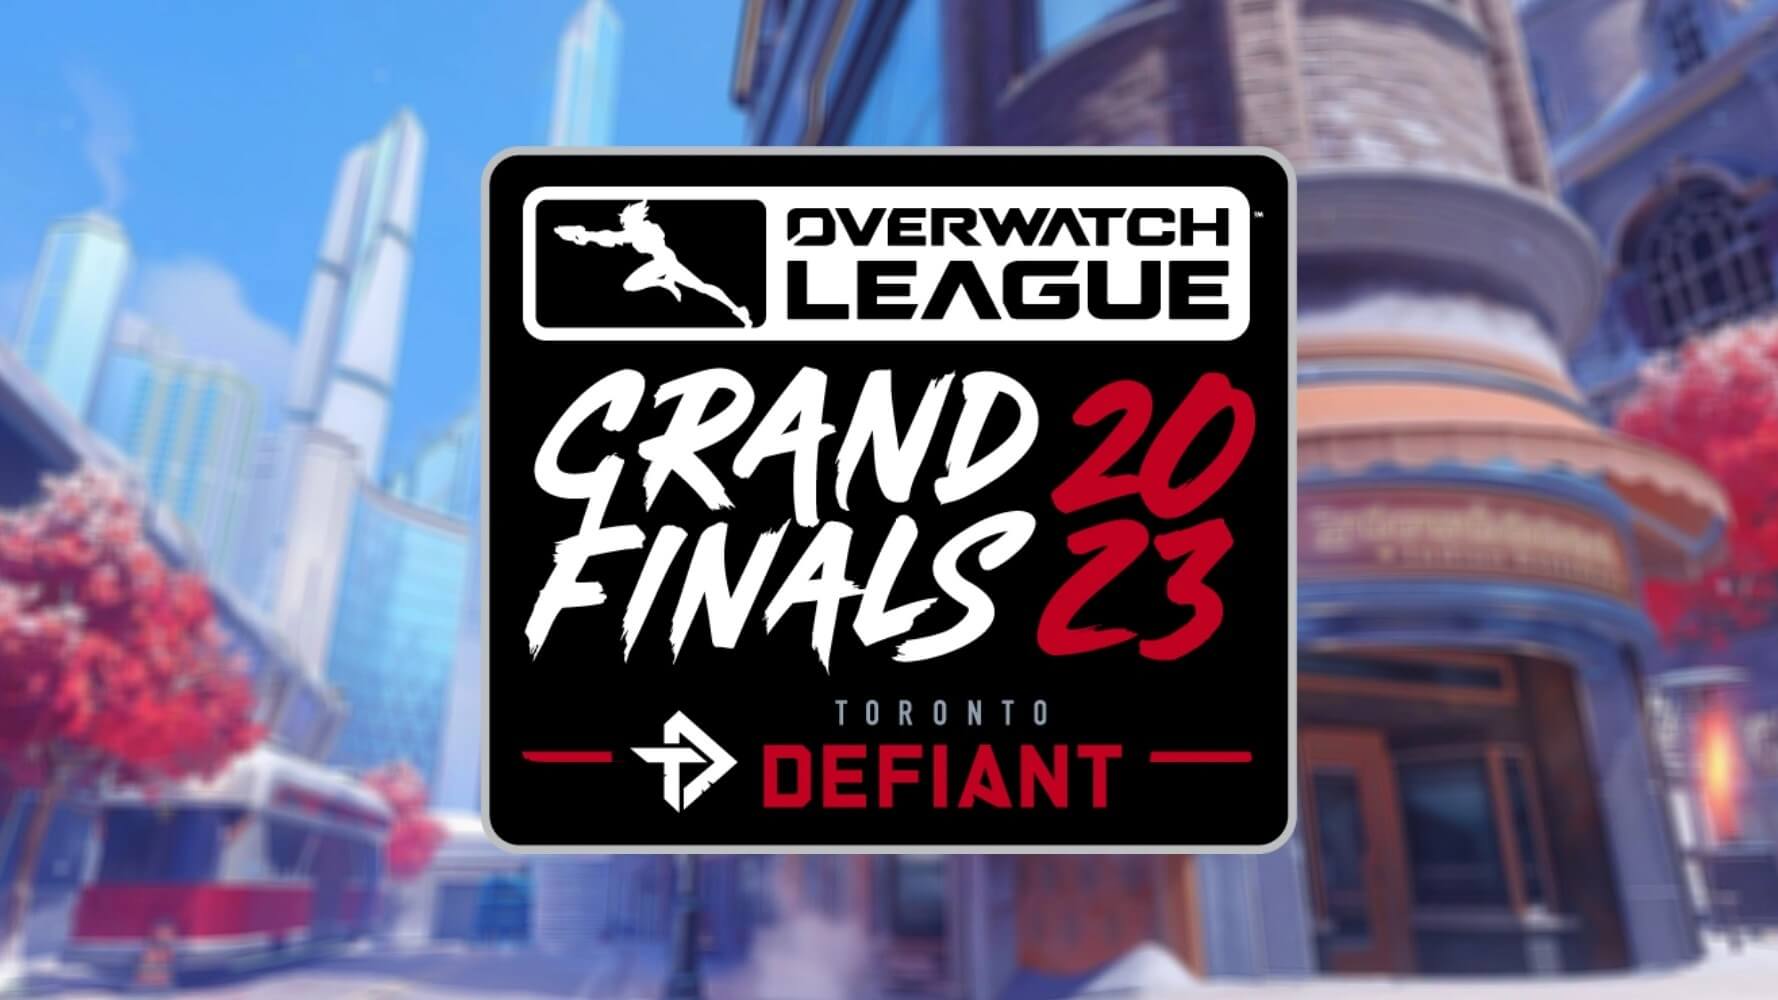 The 2023 Overwatch League Grand Final will be held in Canada